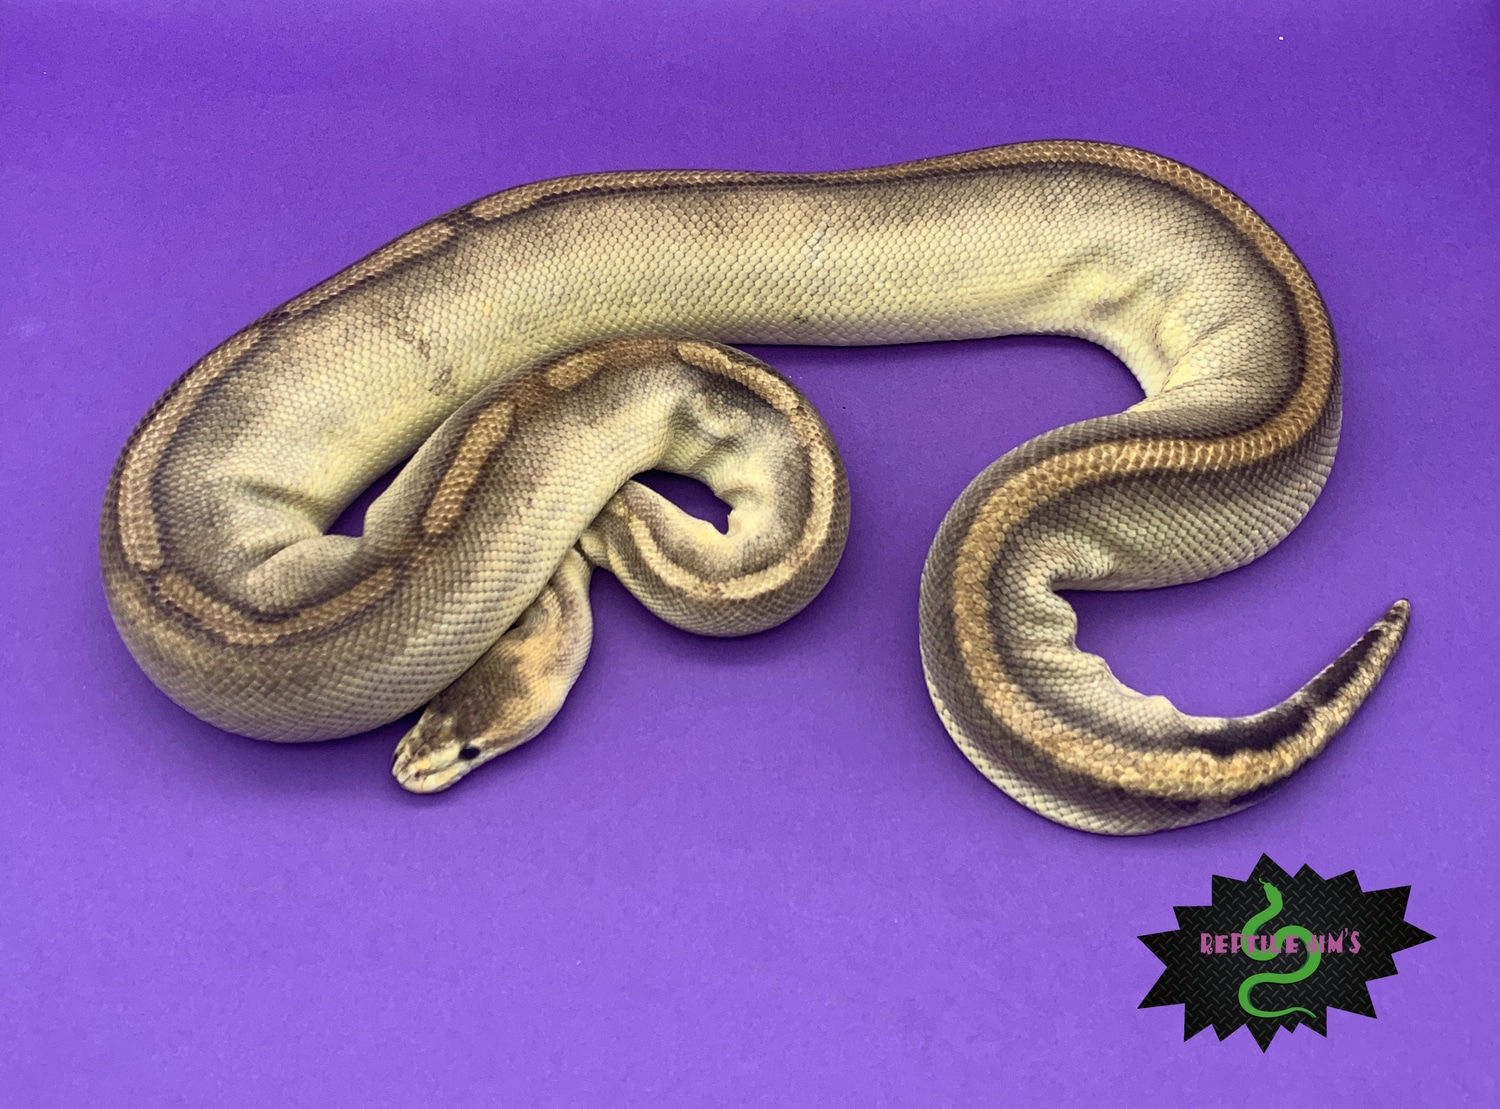 Champagne Ball Python by Reptile Jim's